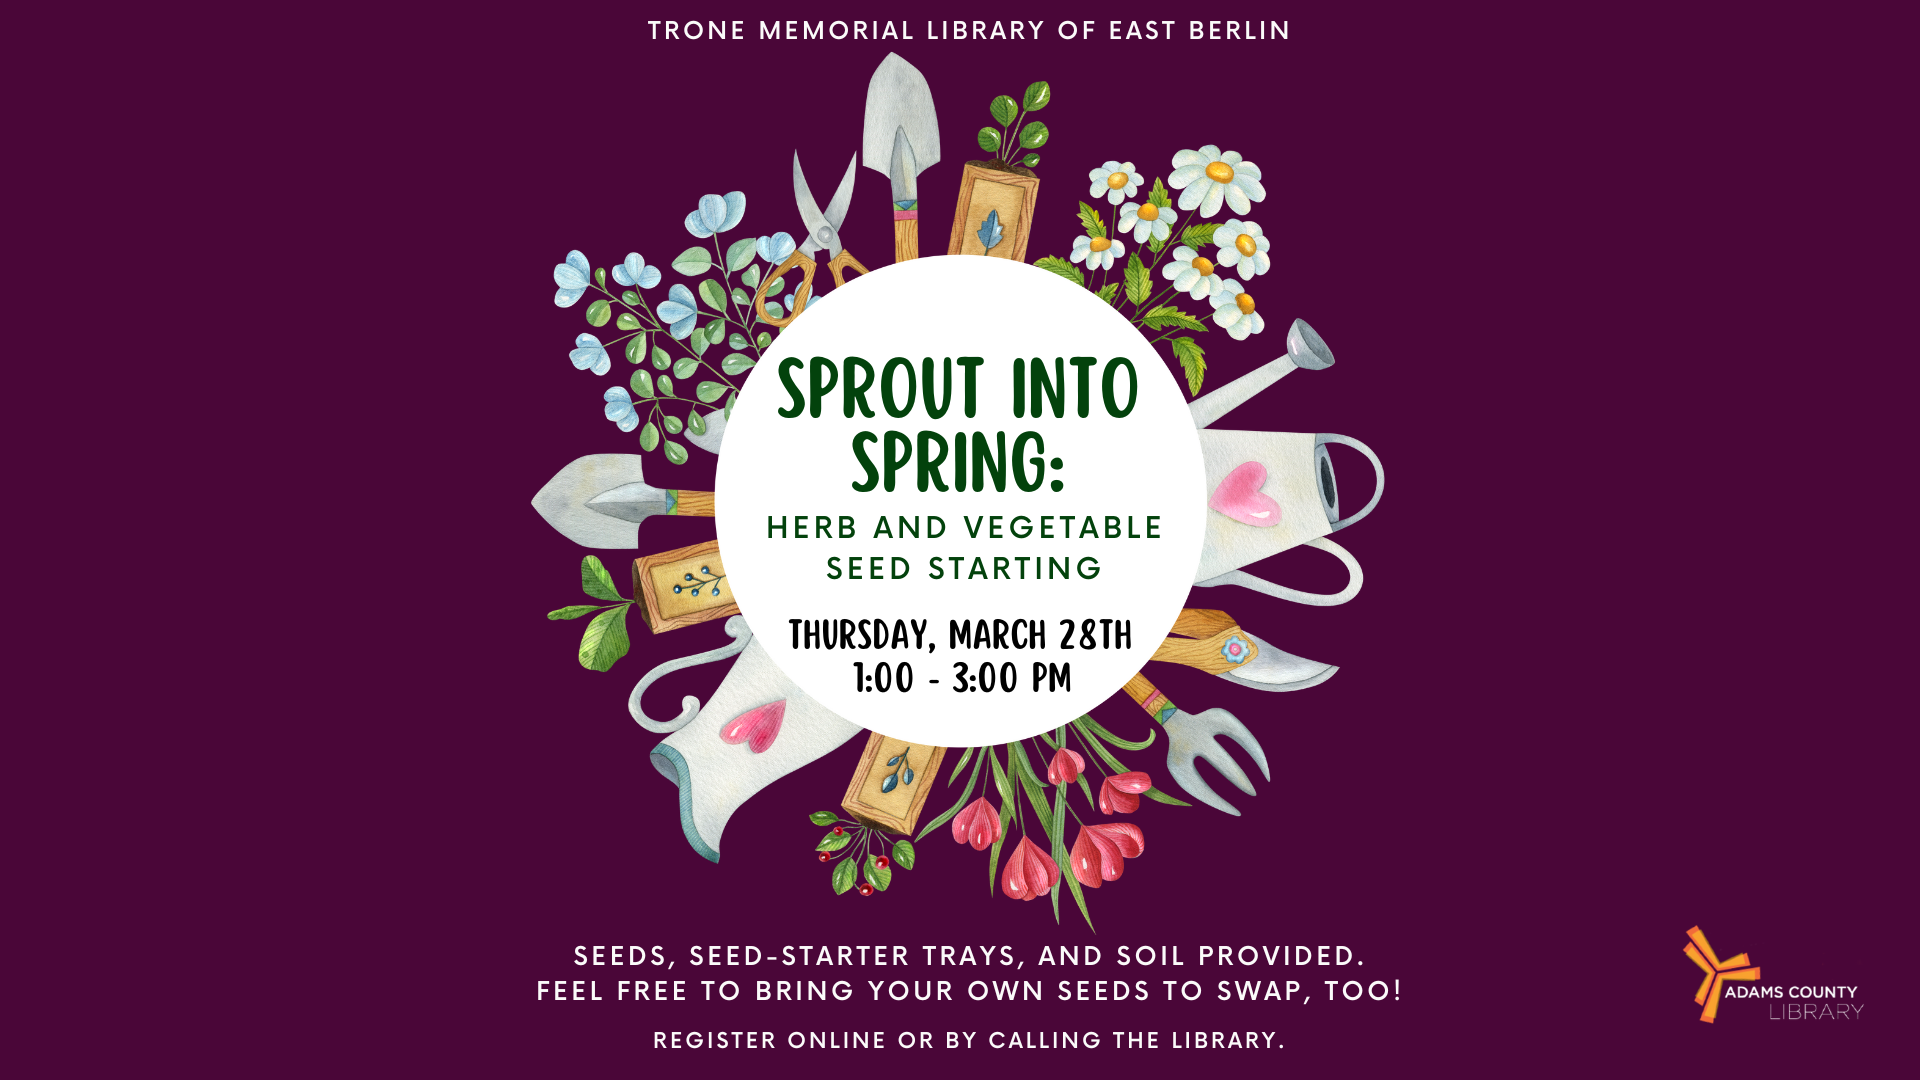 Flyer with information for Sprout into Spring.